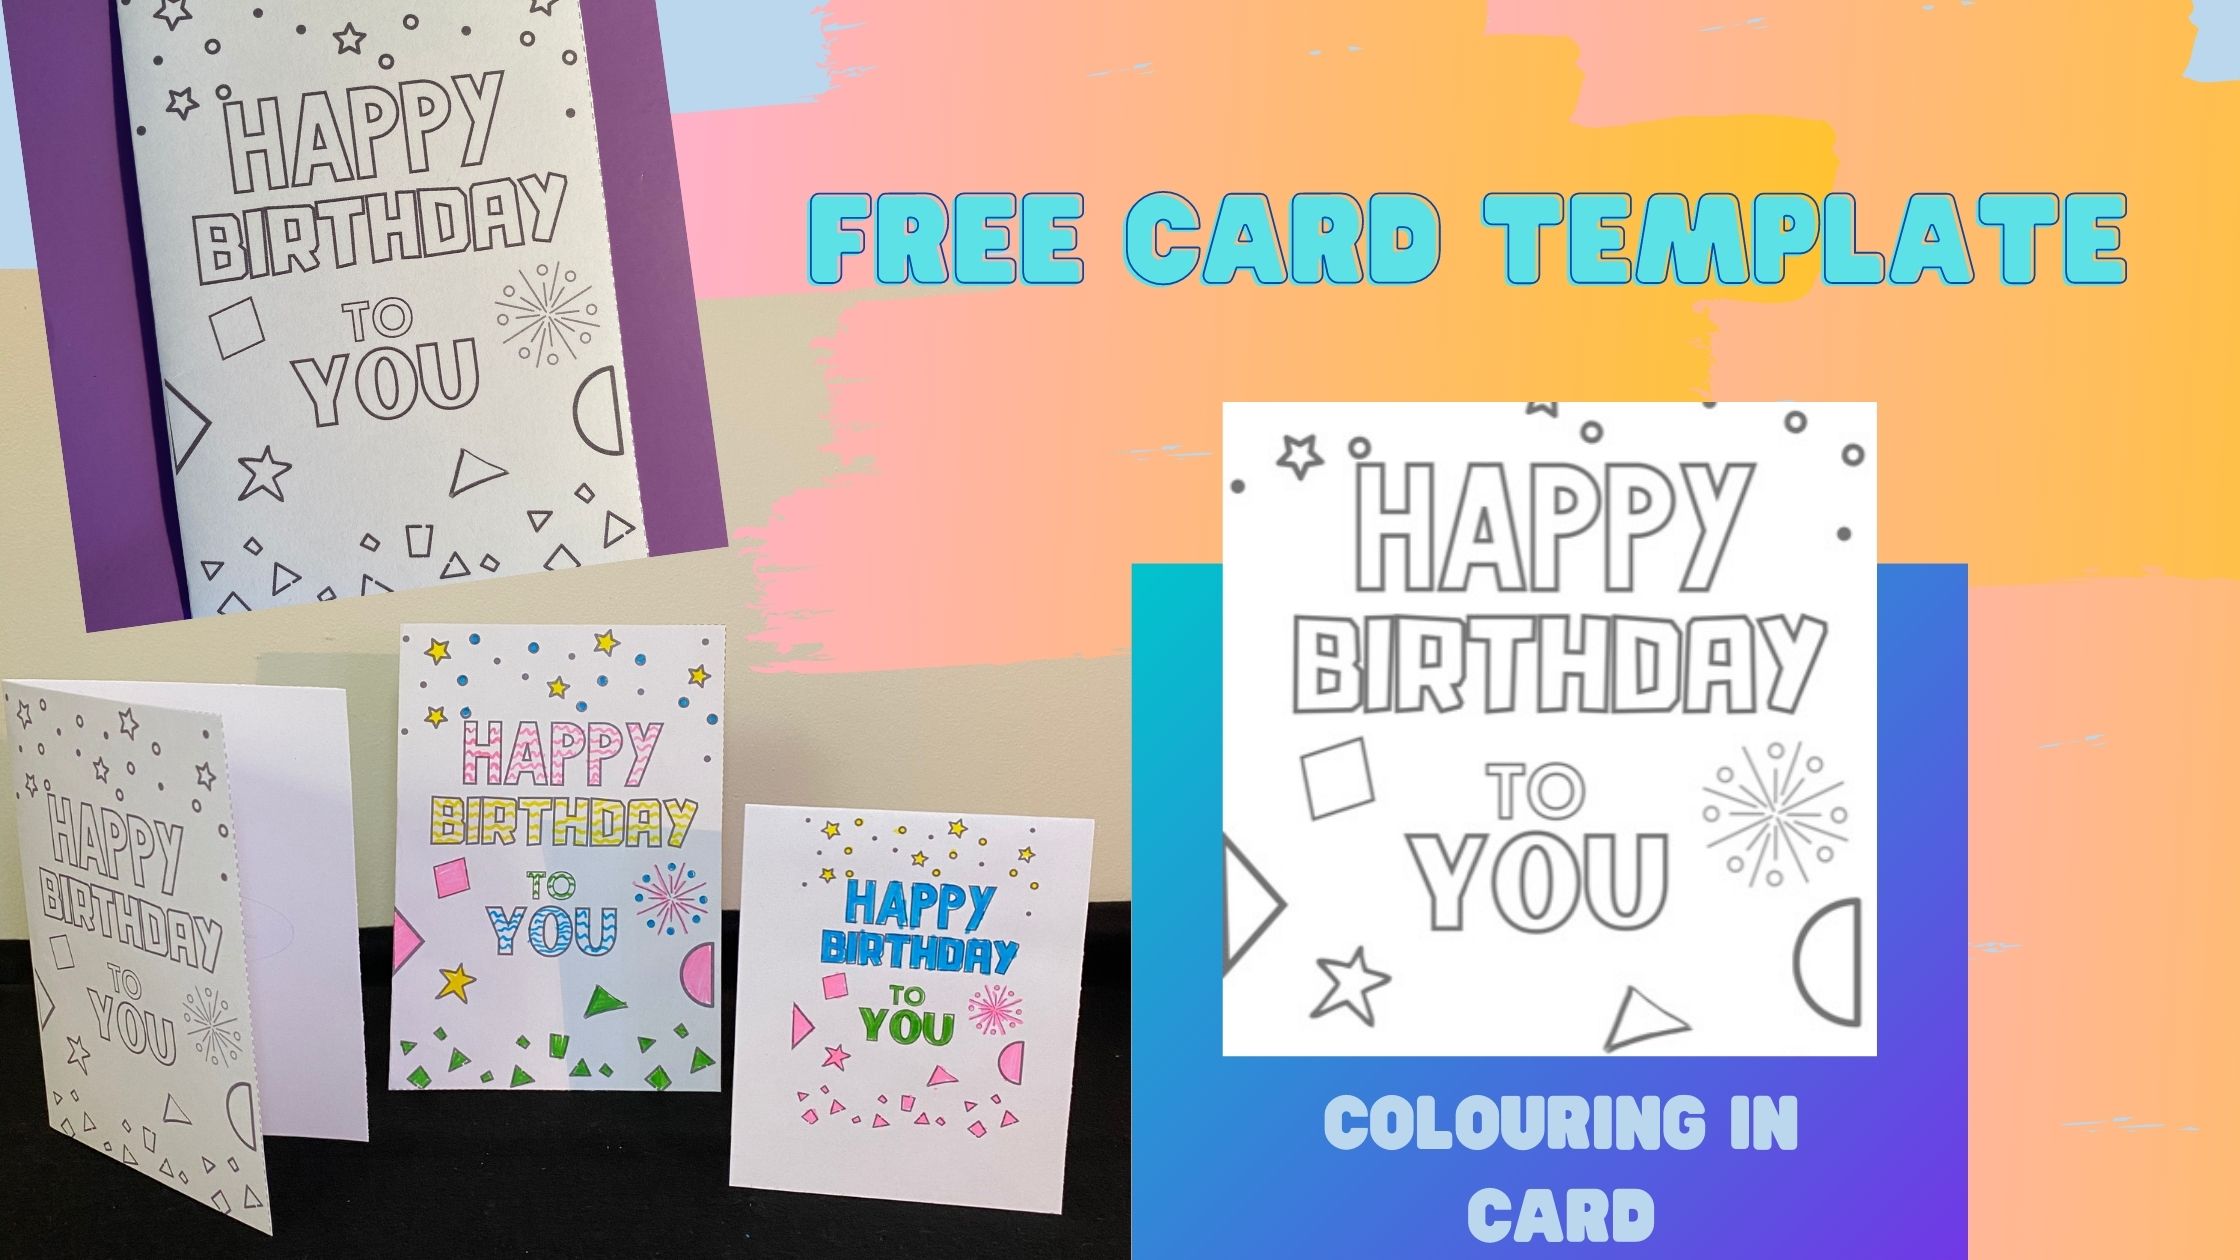 Happy Birthday to You Card Template